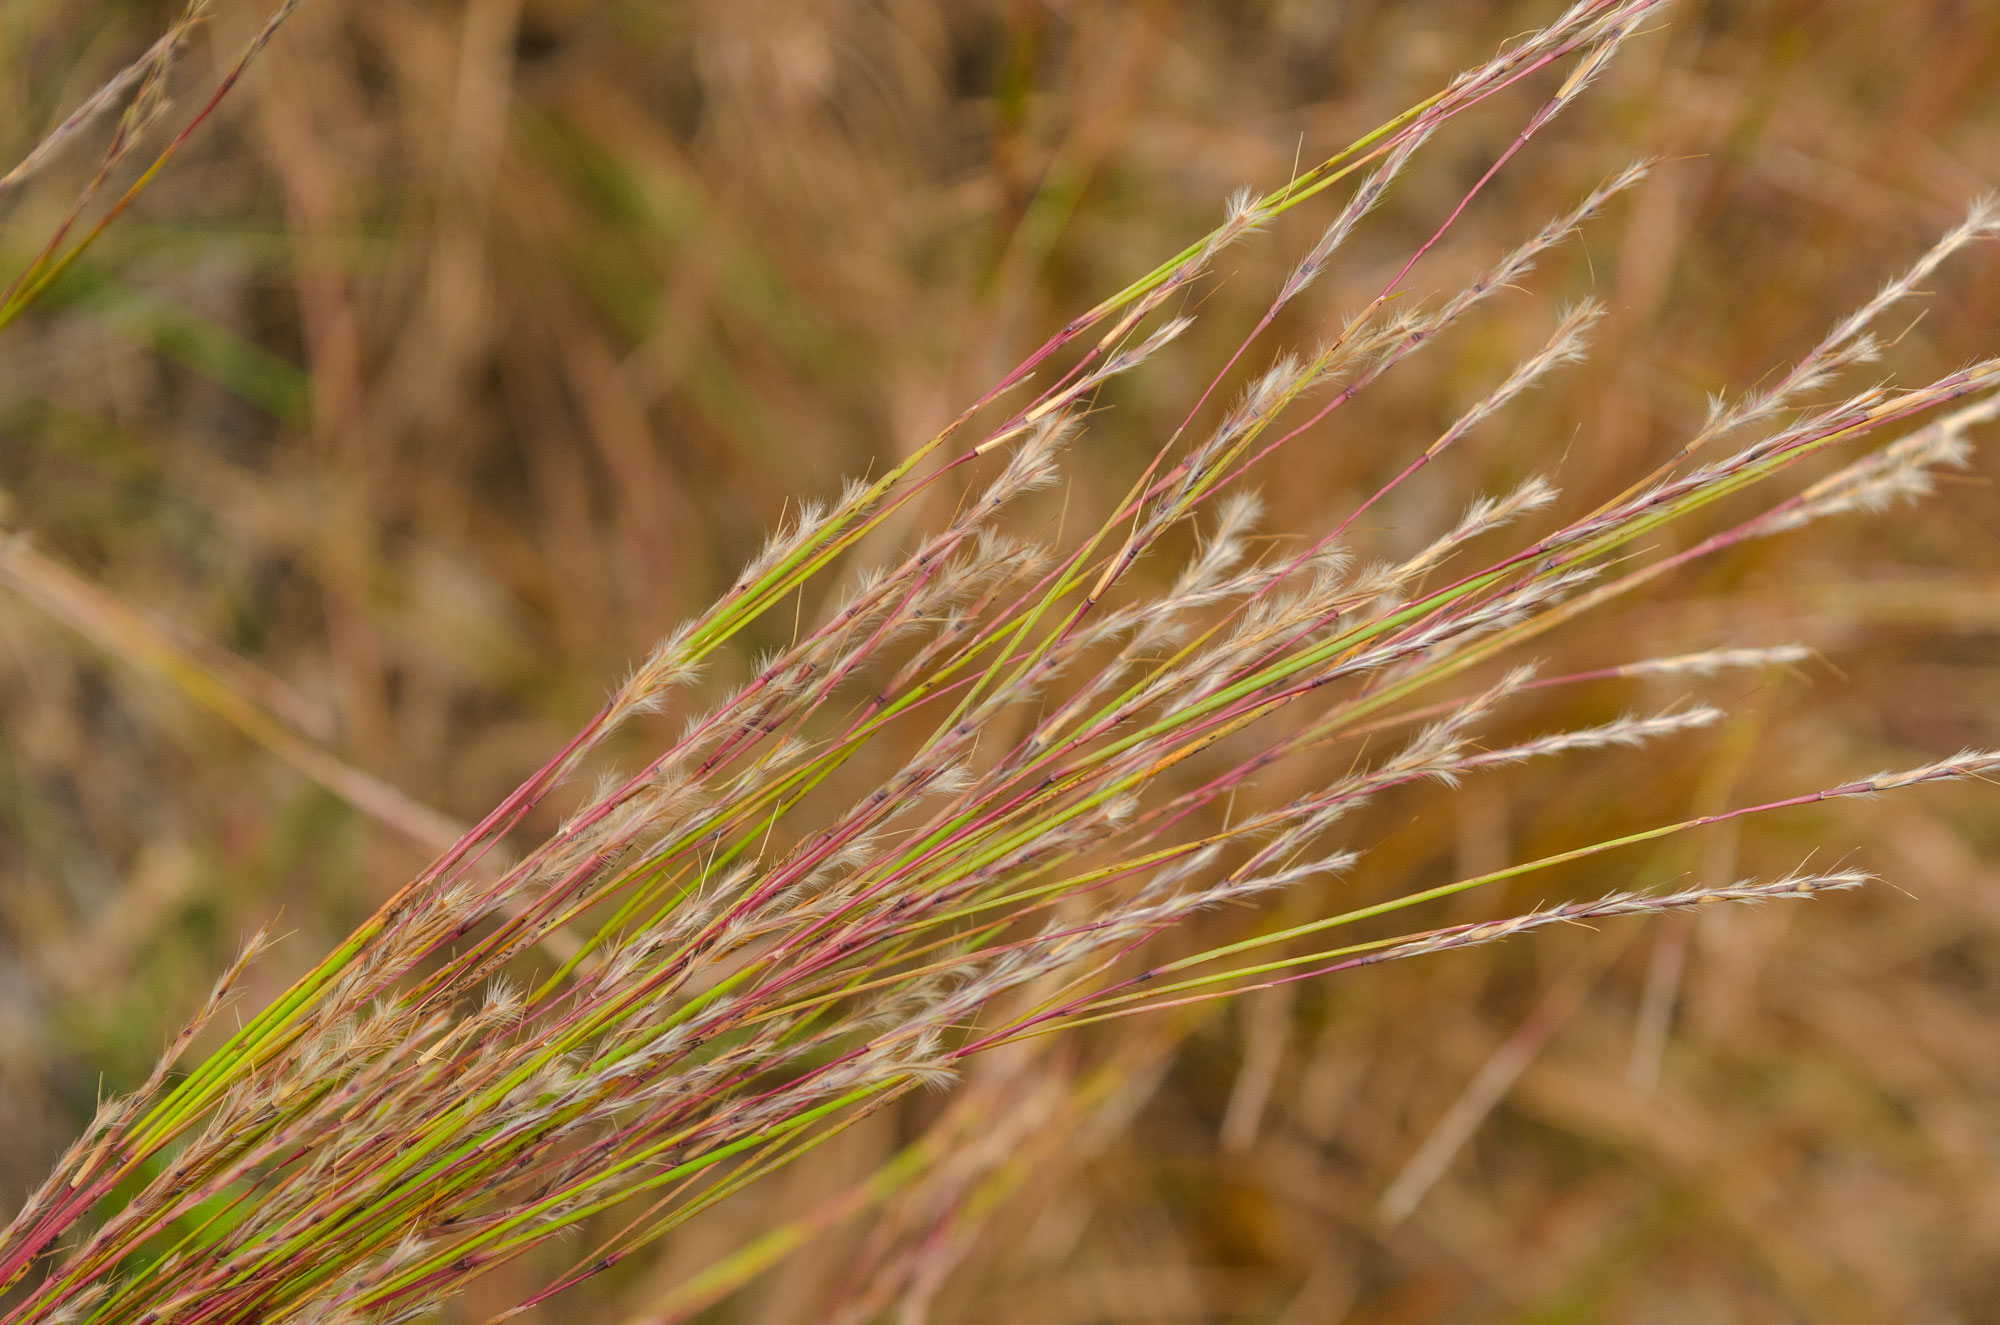 Photograph showing a close-up of little bluestem inflorescences. The photo shows a cluster of red grass stalks with green leaves and feathery off-white inflorescences.